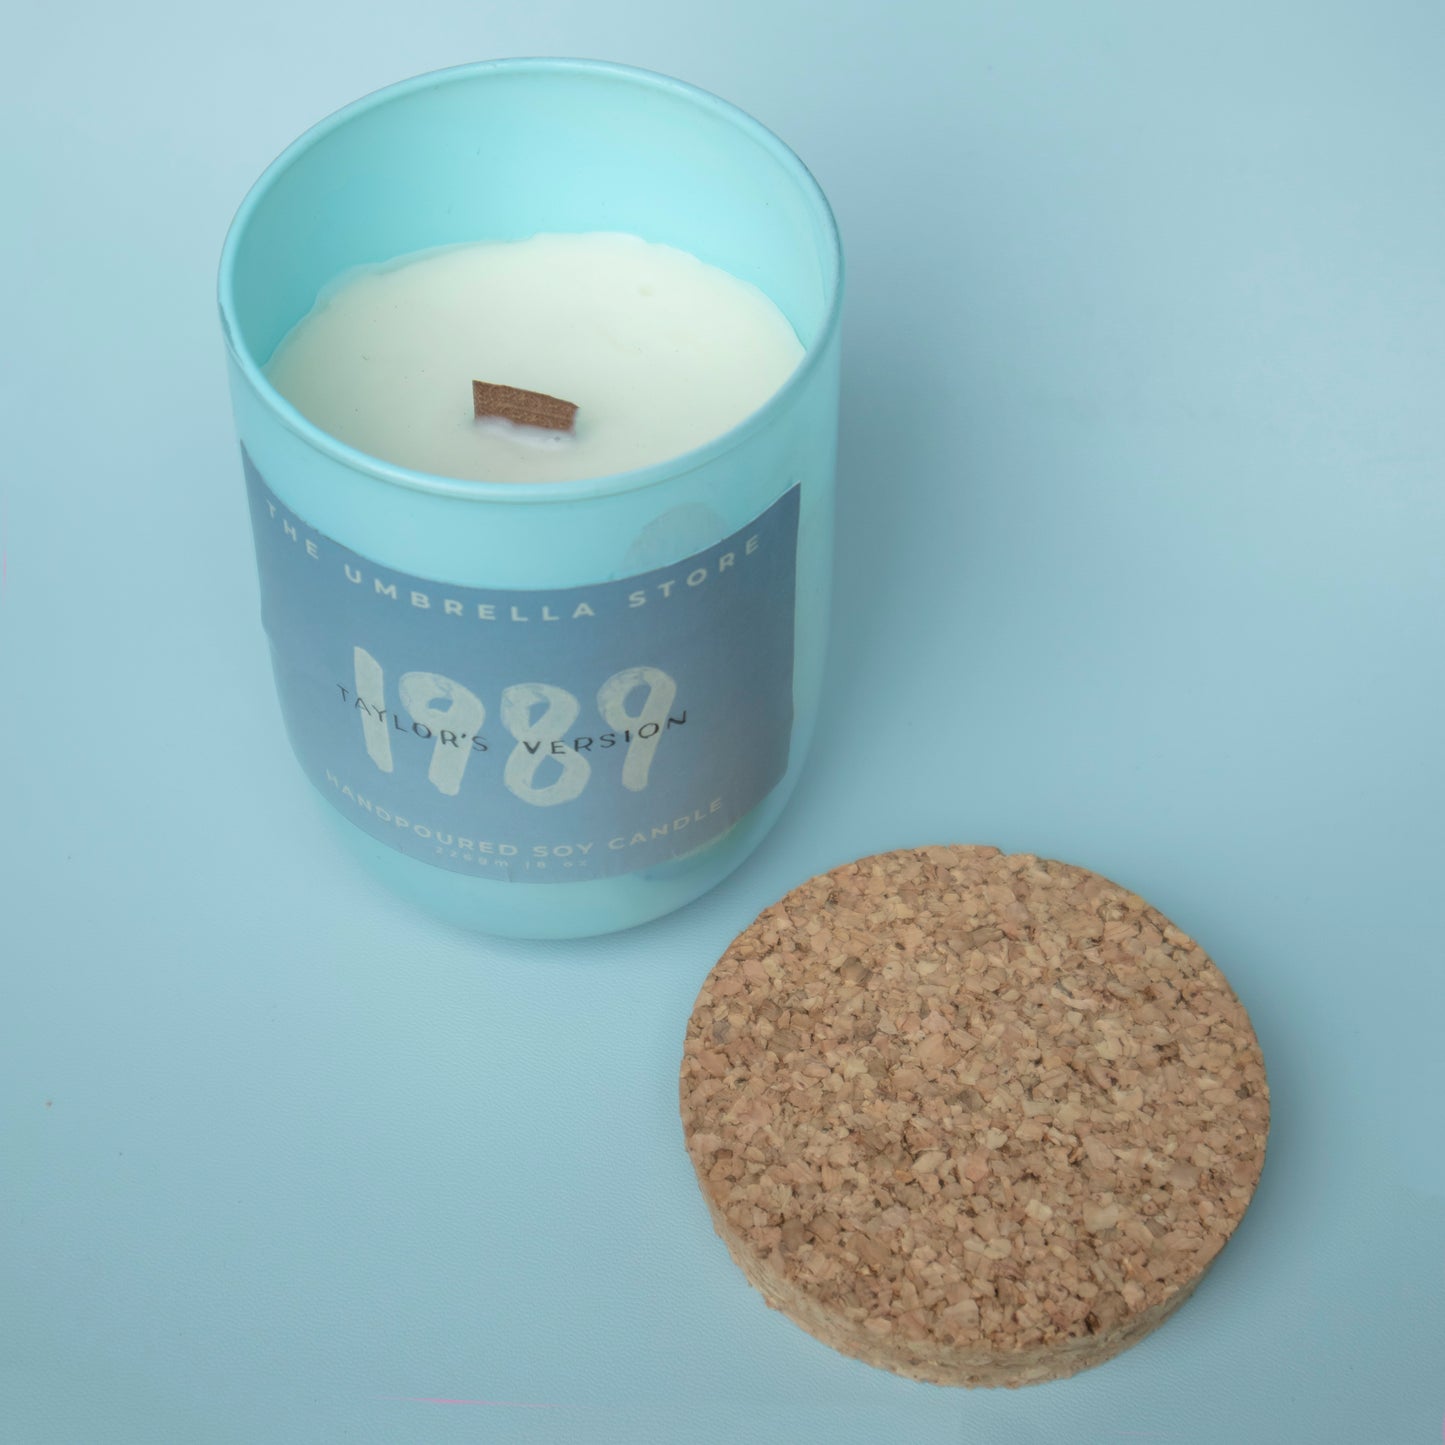 1989 Taylor's version scented candle- Limited Edition